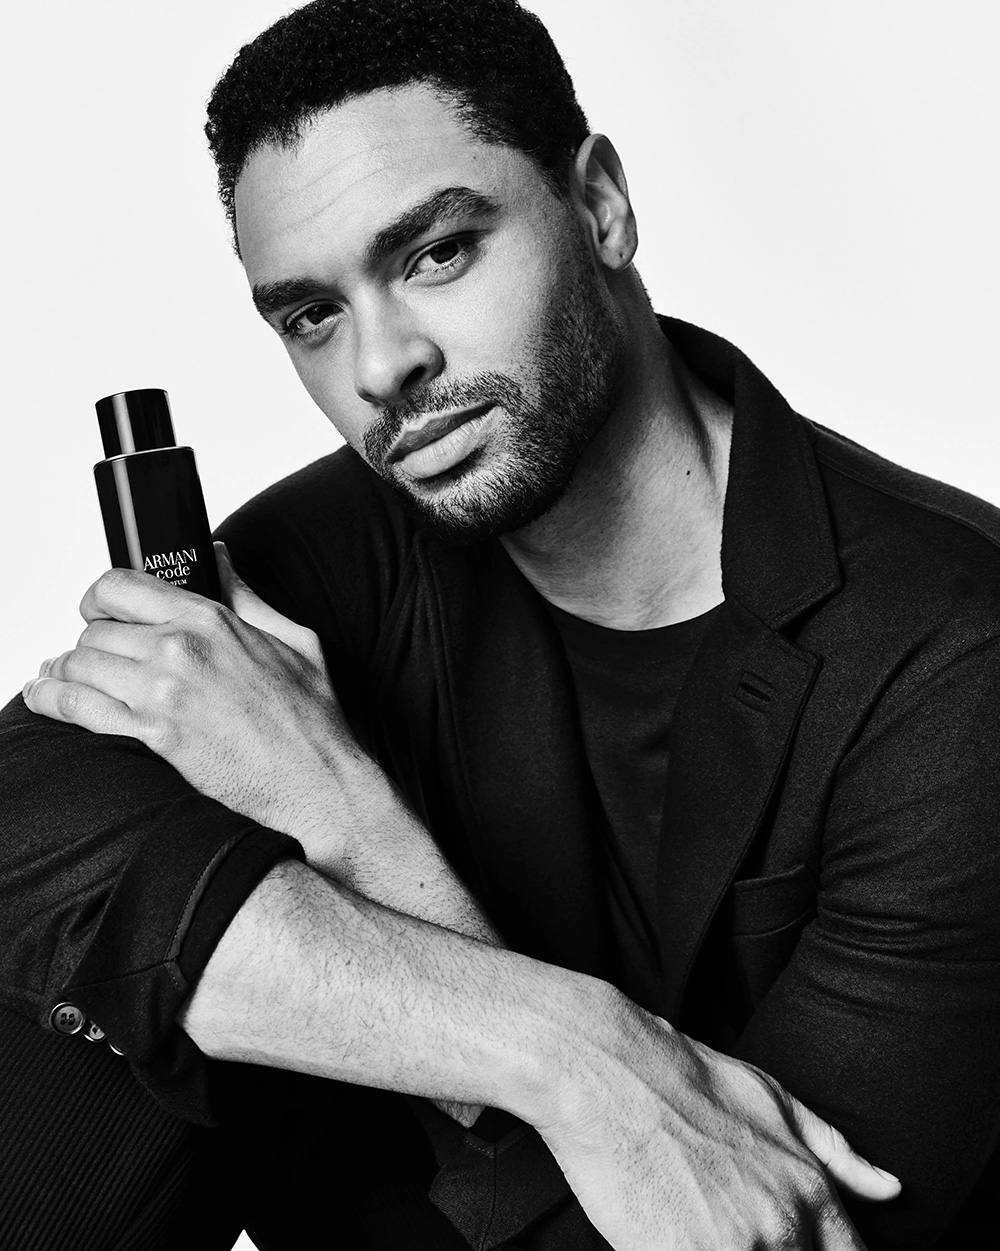 Regé-Jean Page is the New Face of Armani Code Parfum